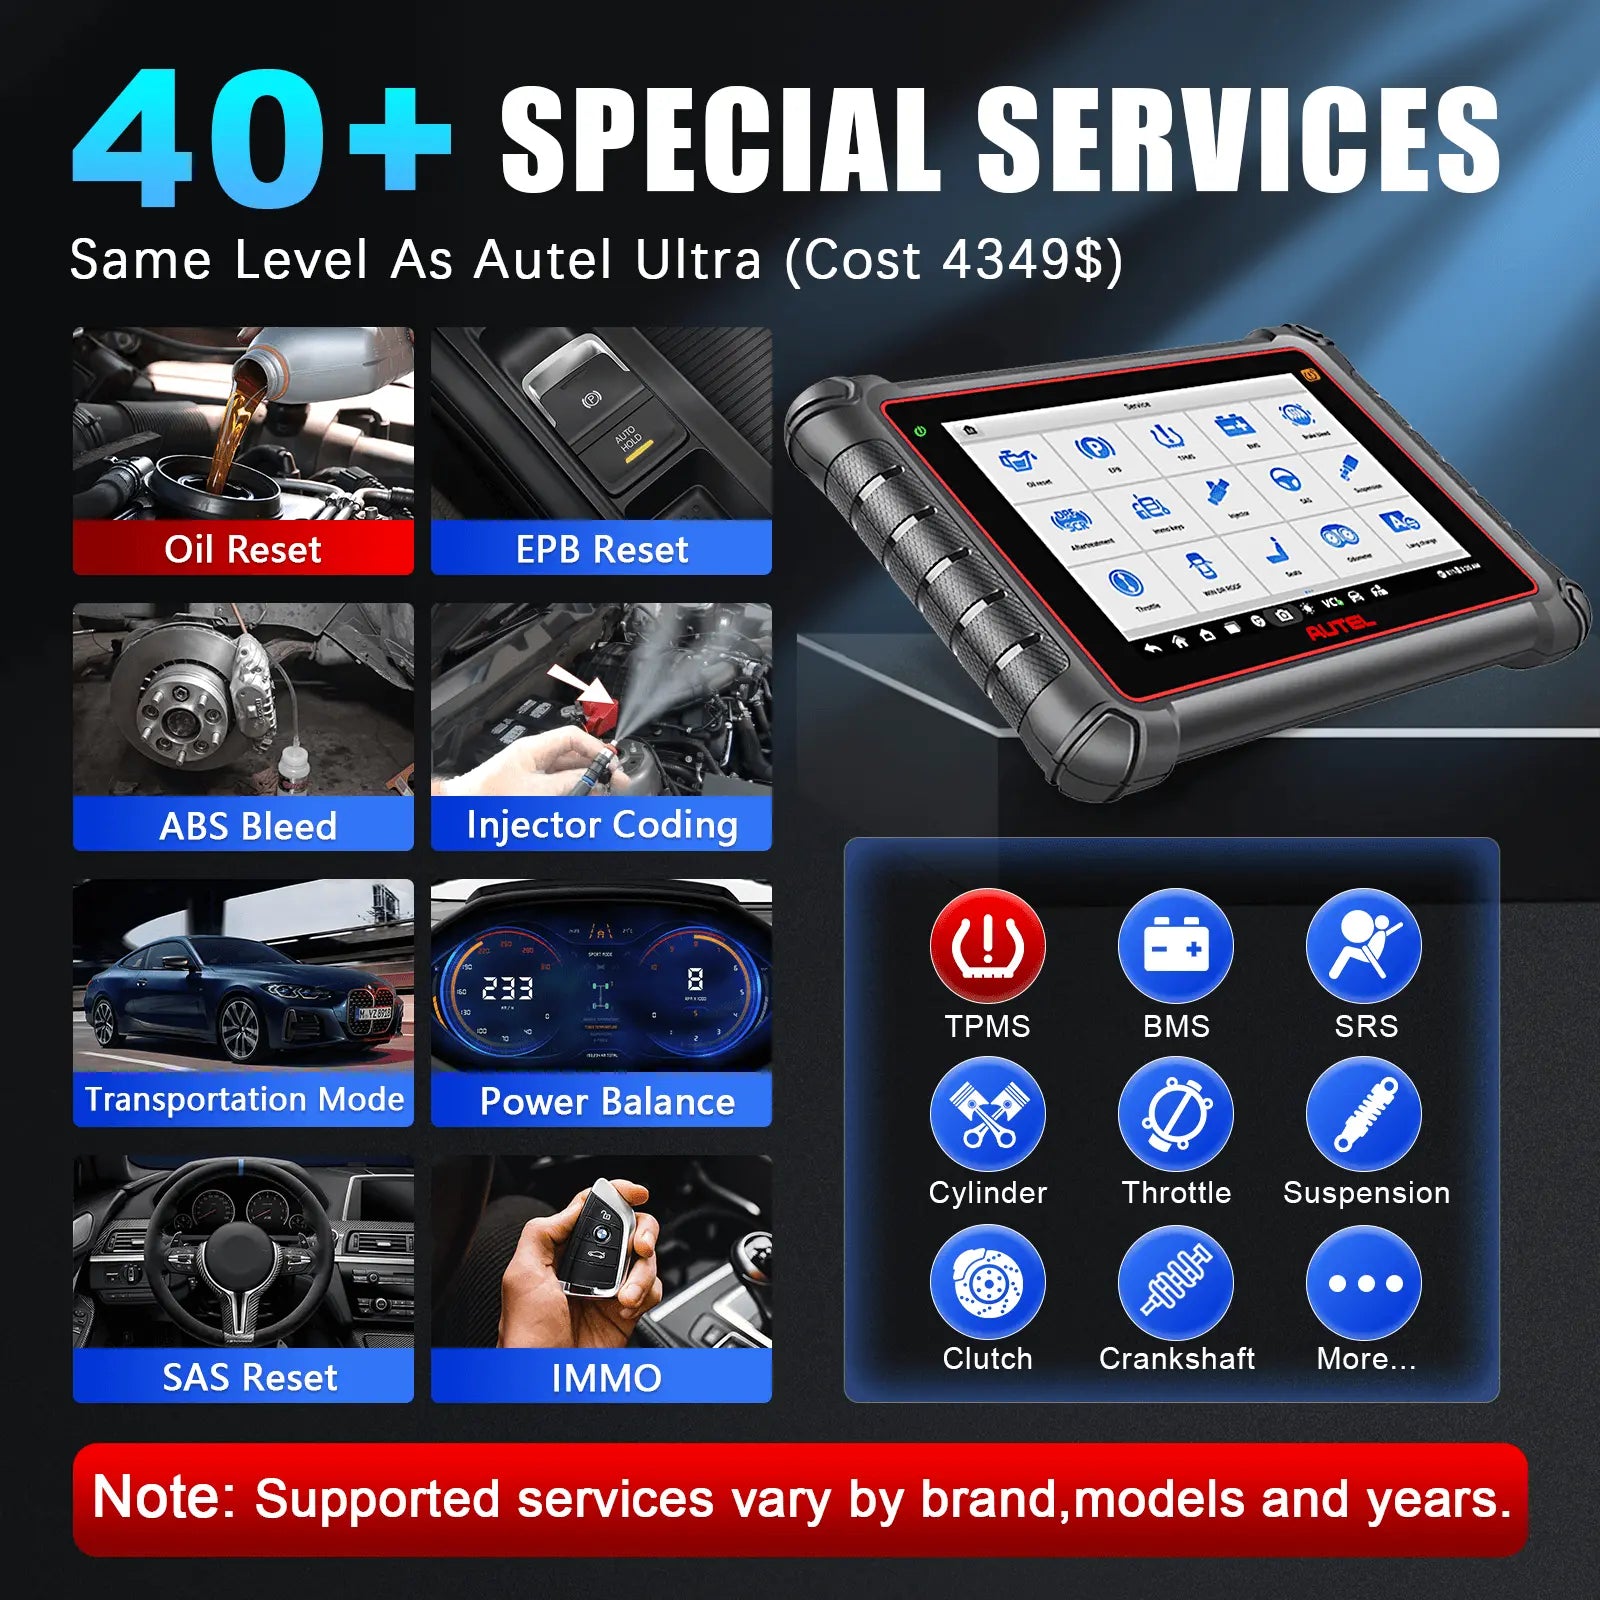 40+ special services with same leverl as Autel Ultra